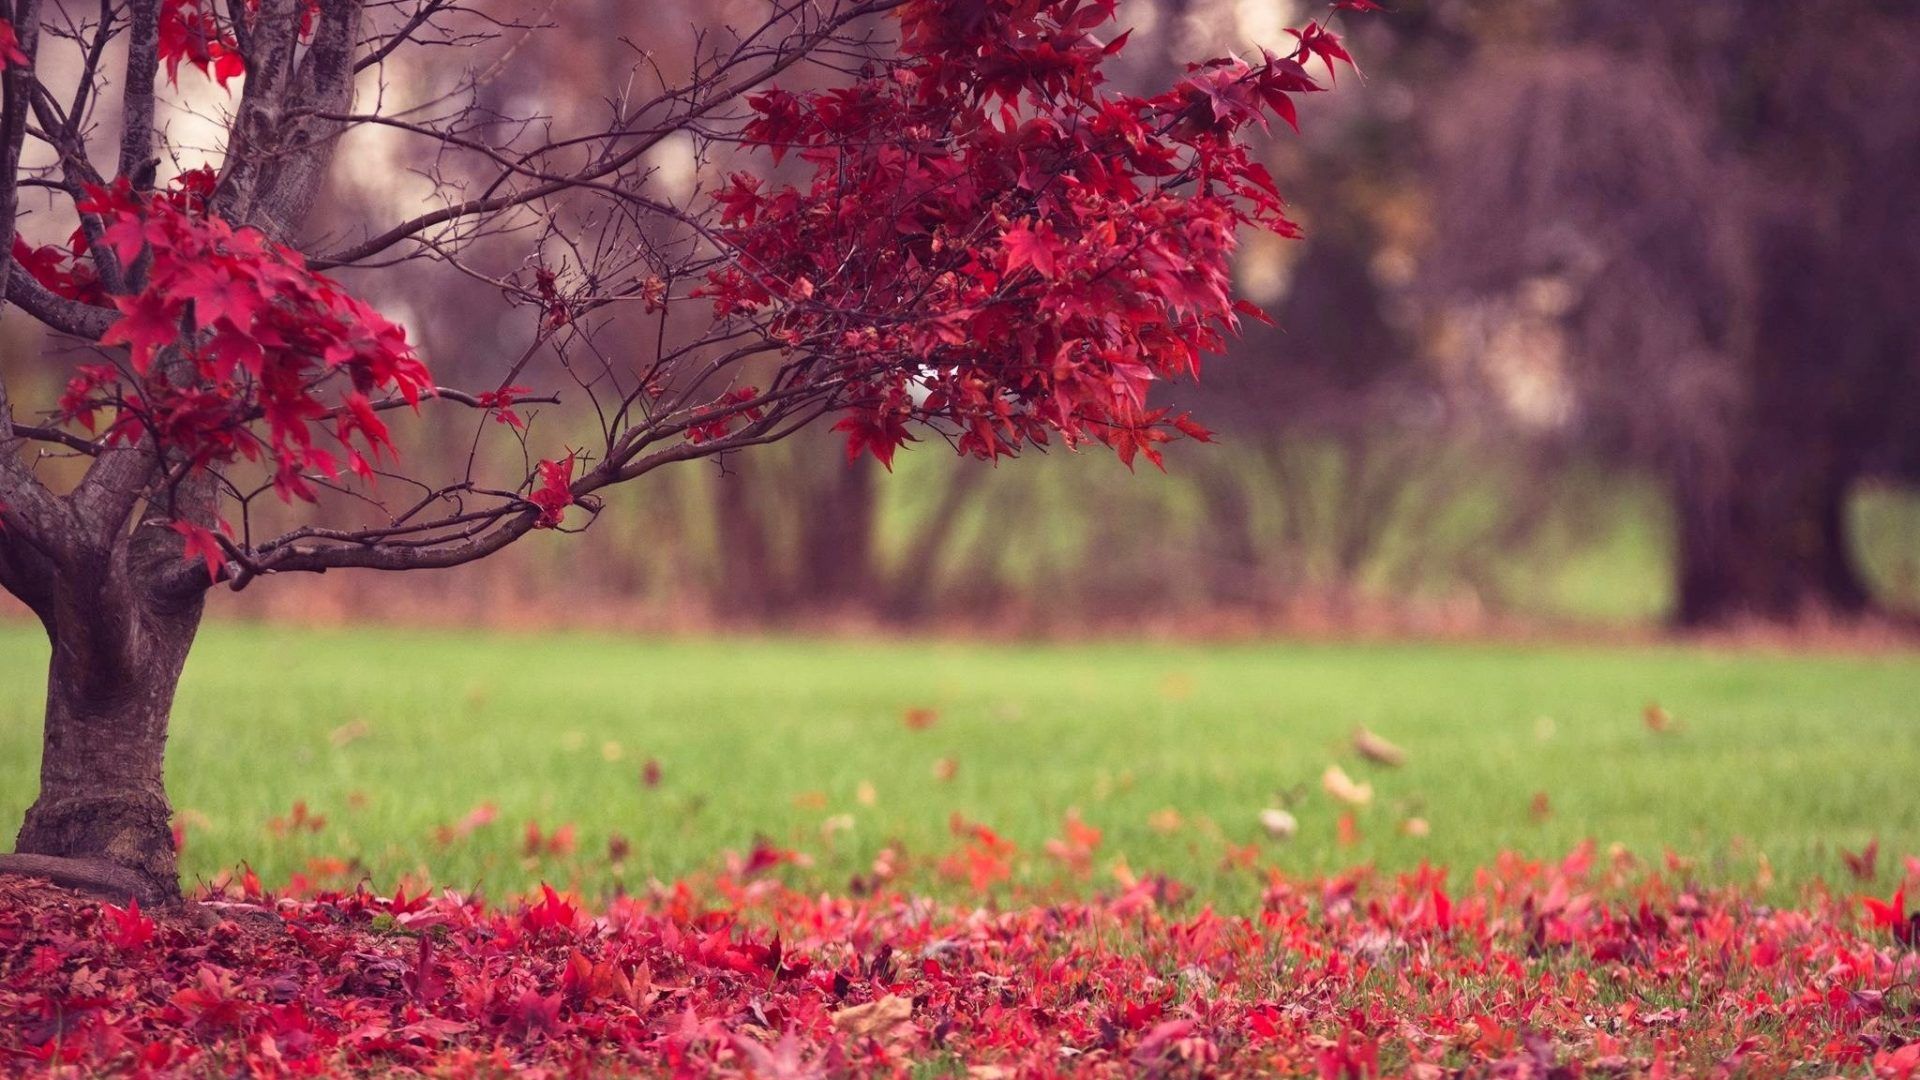 hd wallpaper for laptop full screen,red,tree,nature,spring,plant